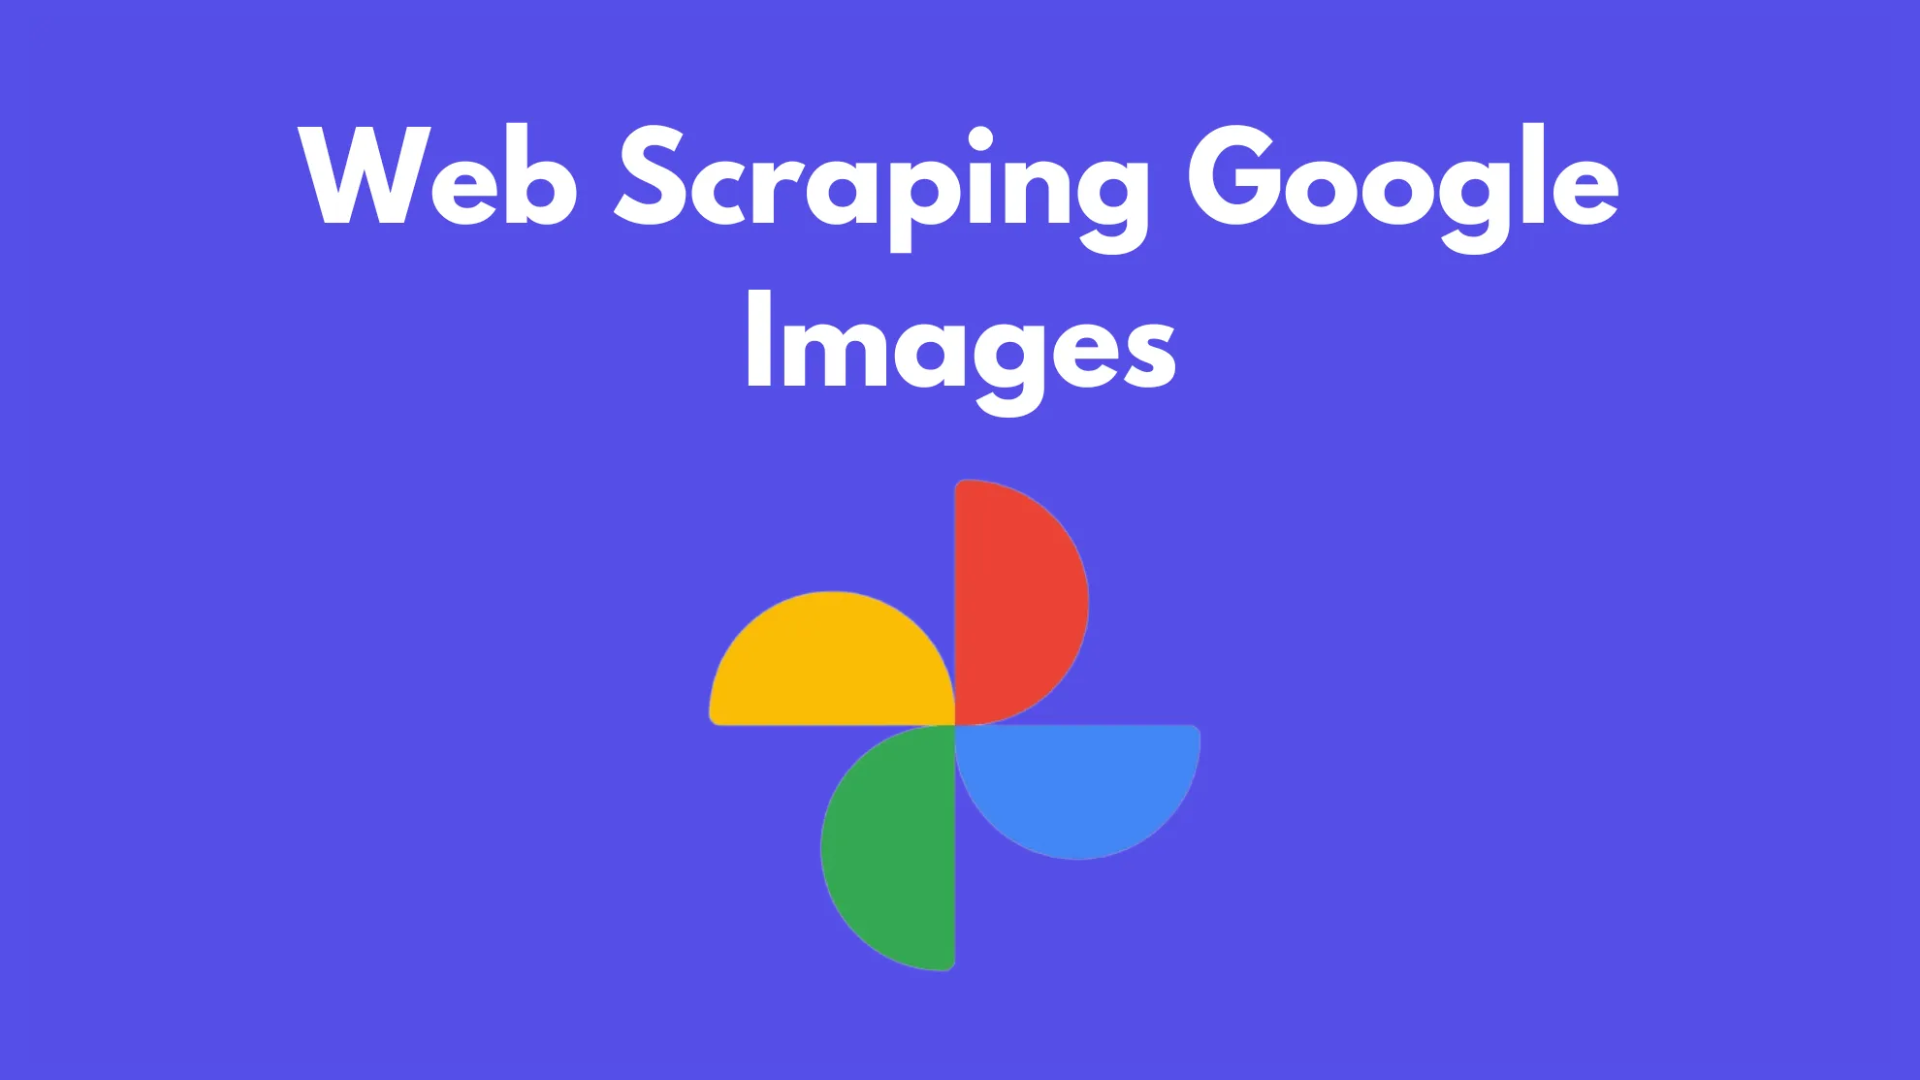 How to Scrape Google Images With Python